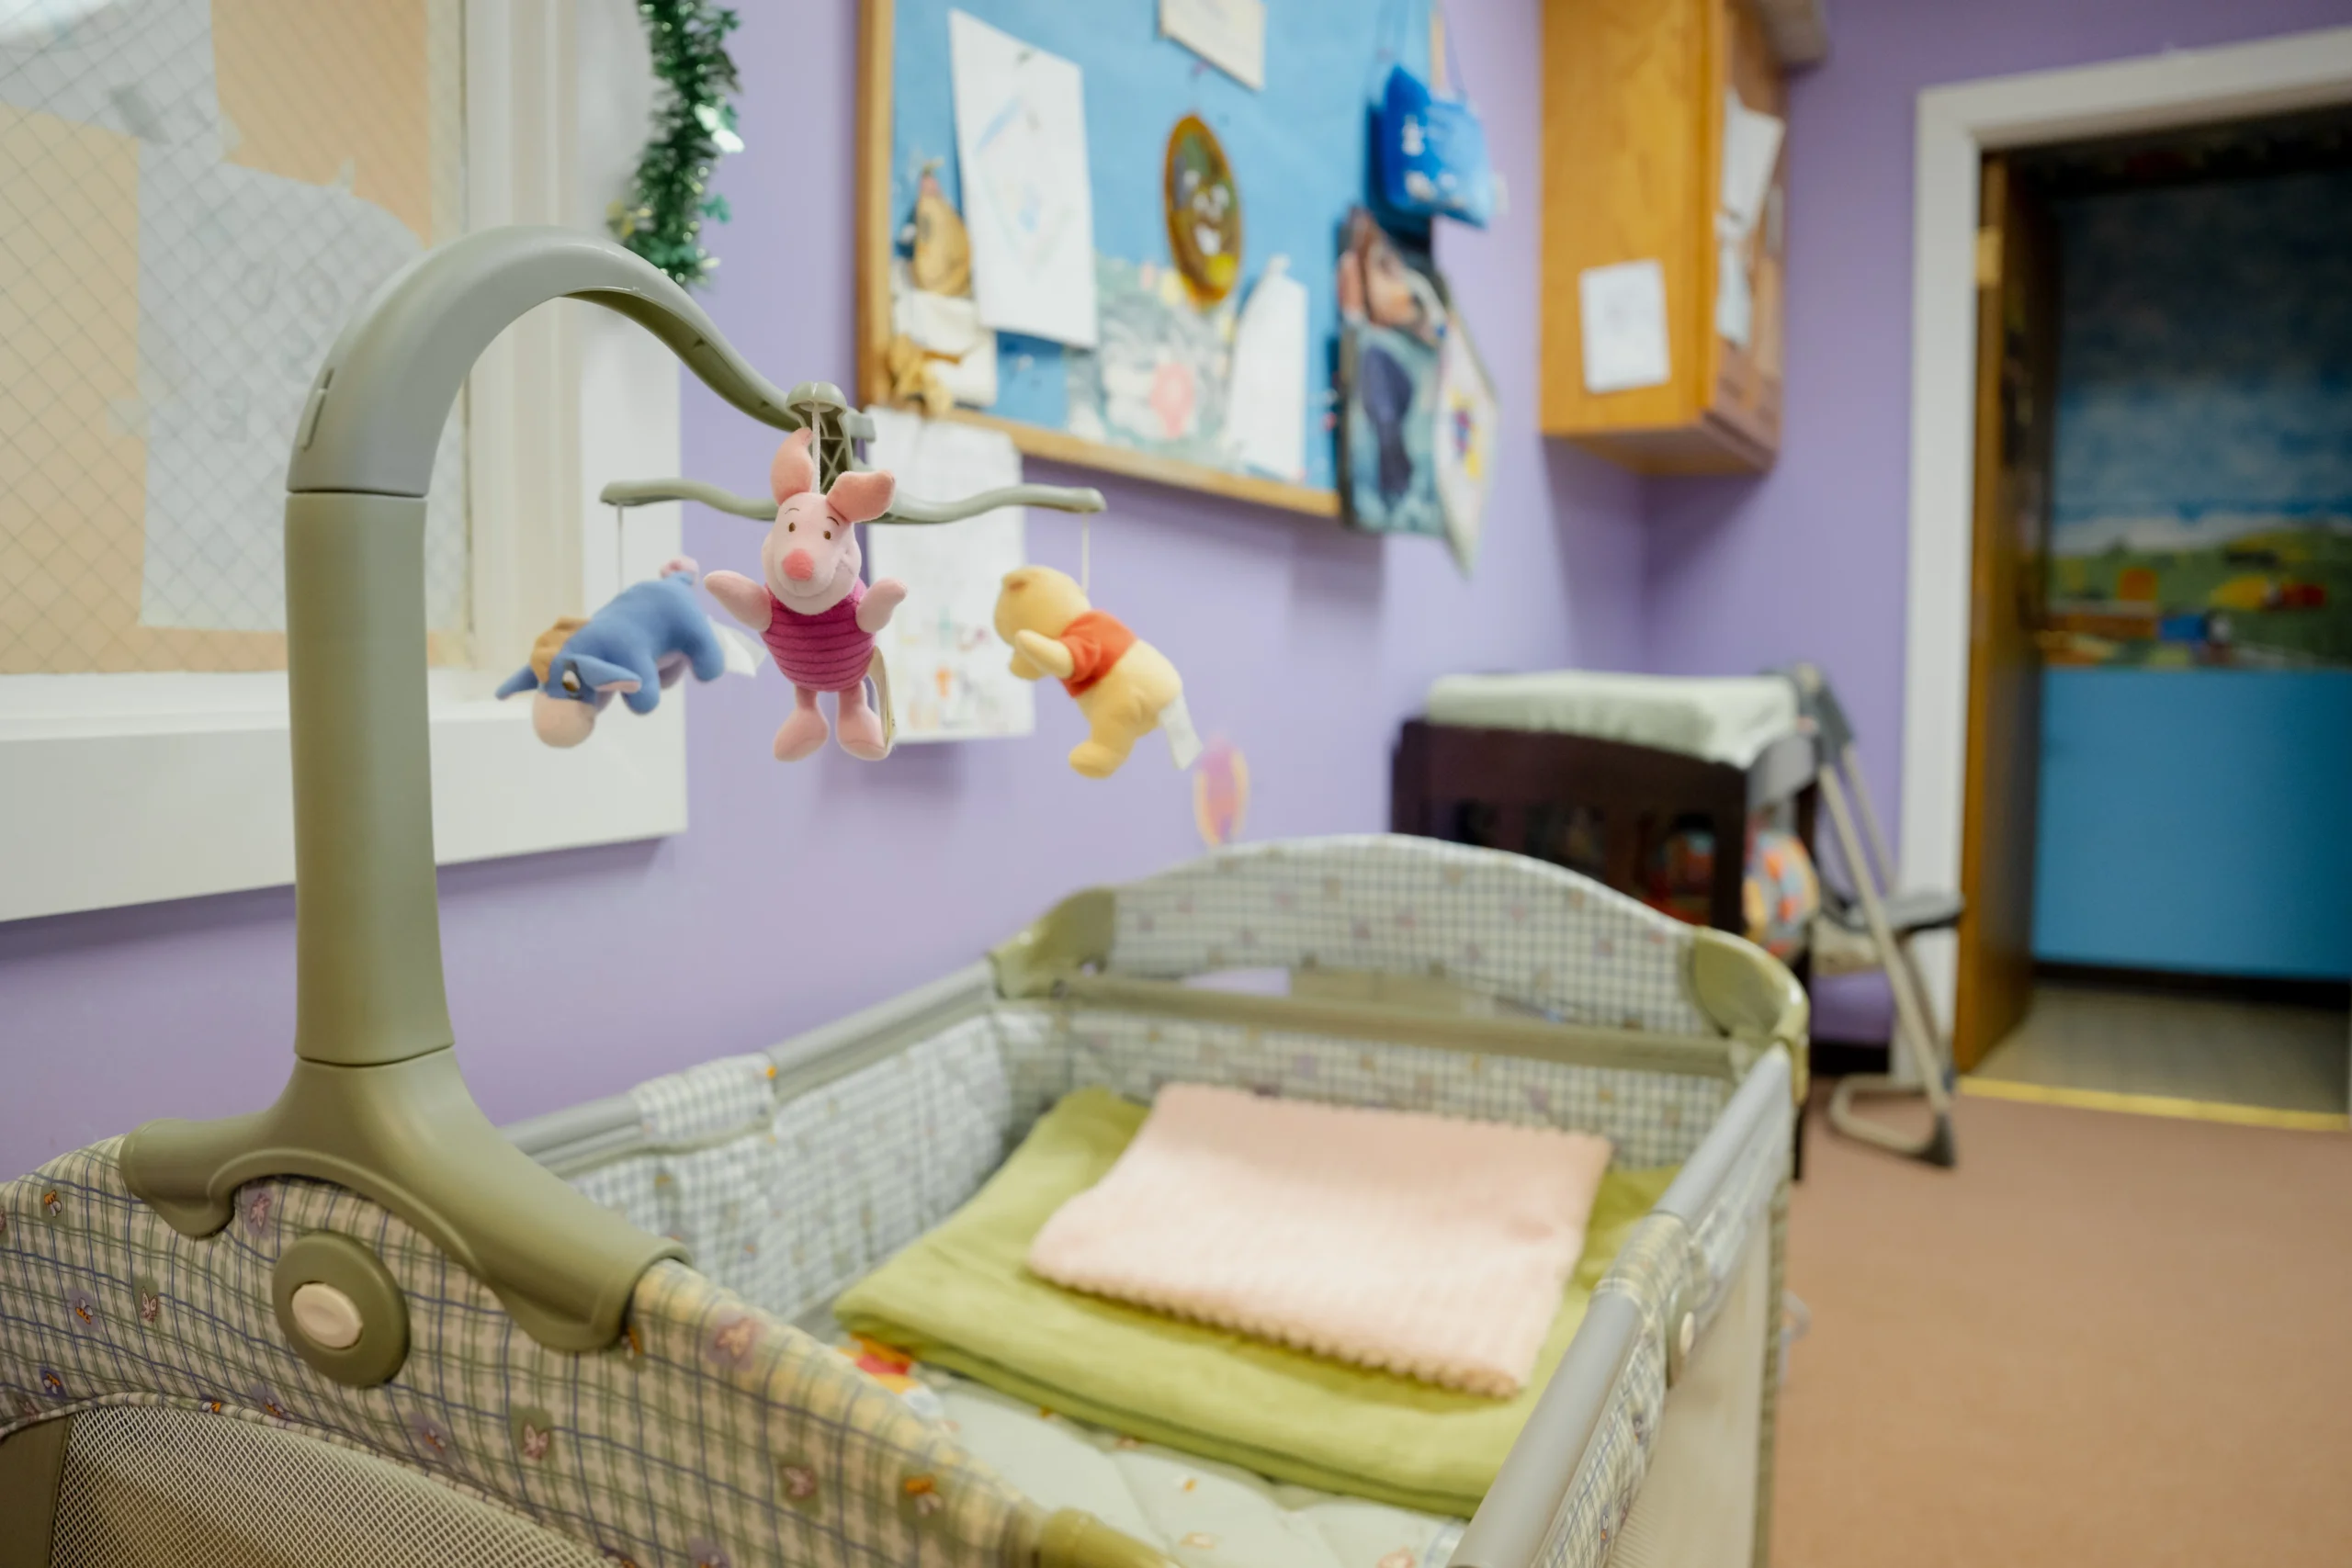 University Church has a nursery for children during church service. This photo is from the nursery.